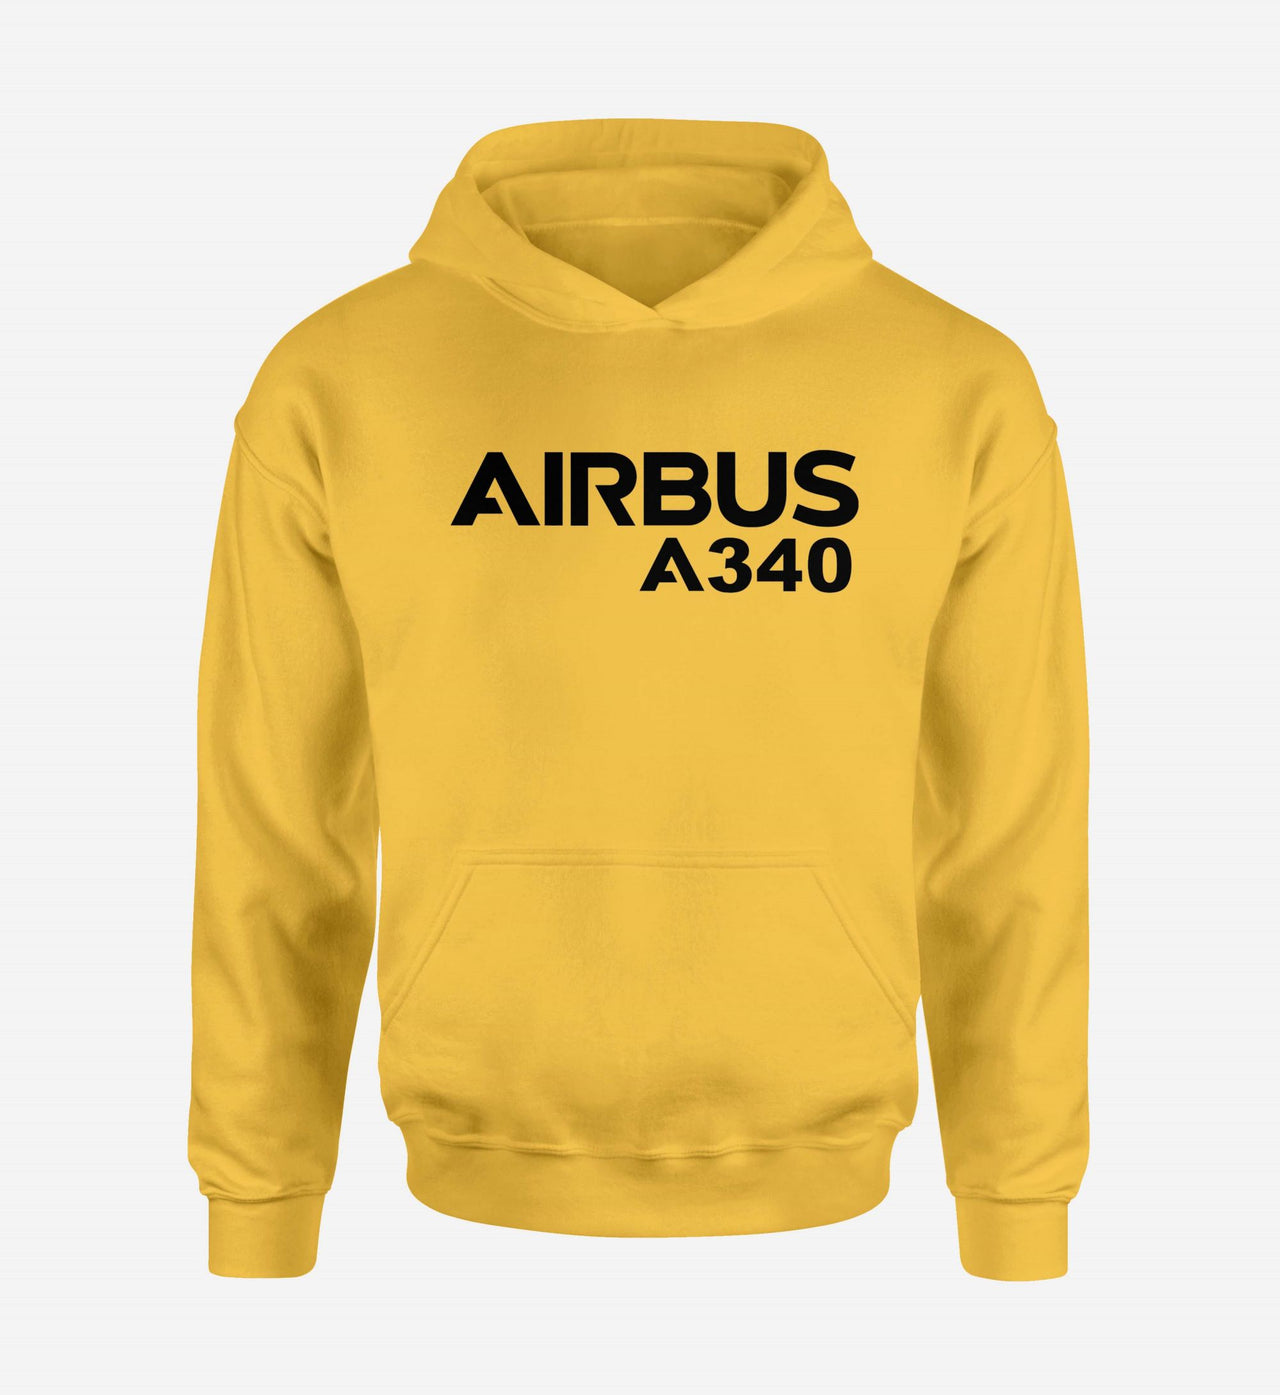 Airbus A340 & Text Designed Hoodies